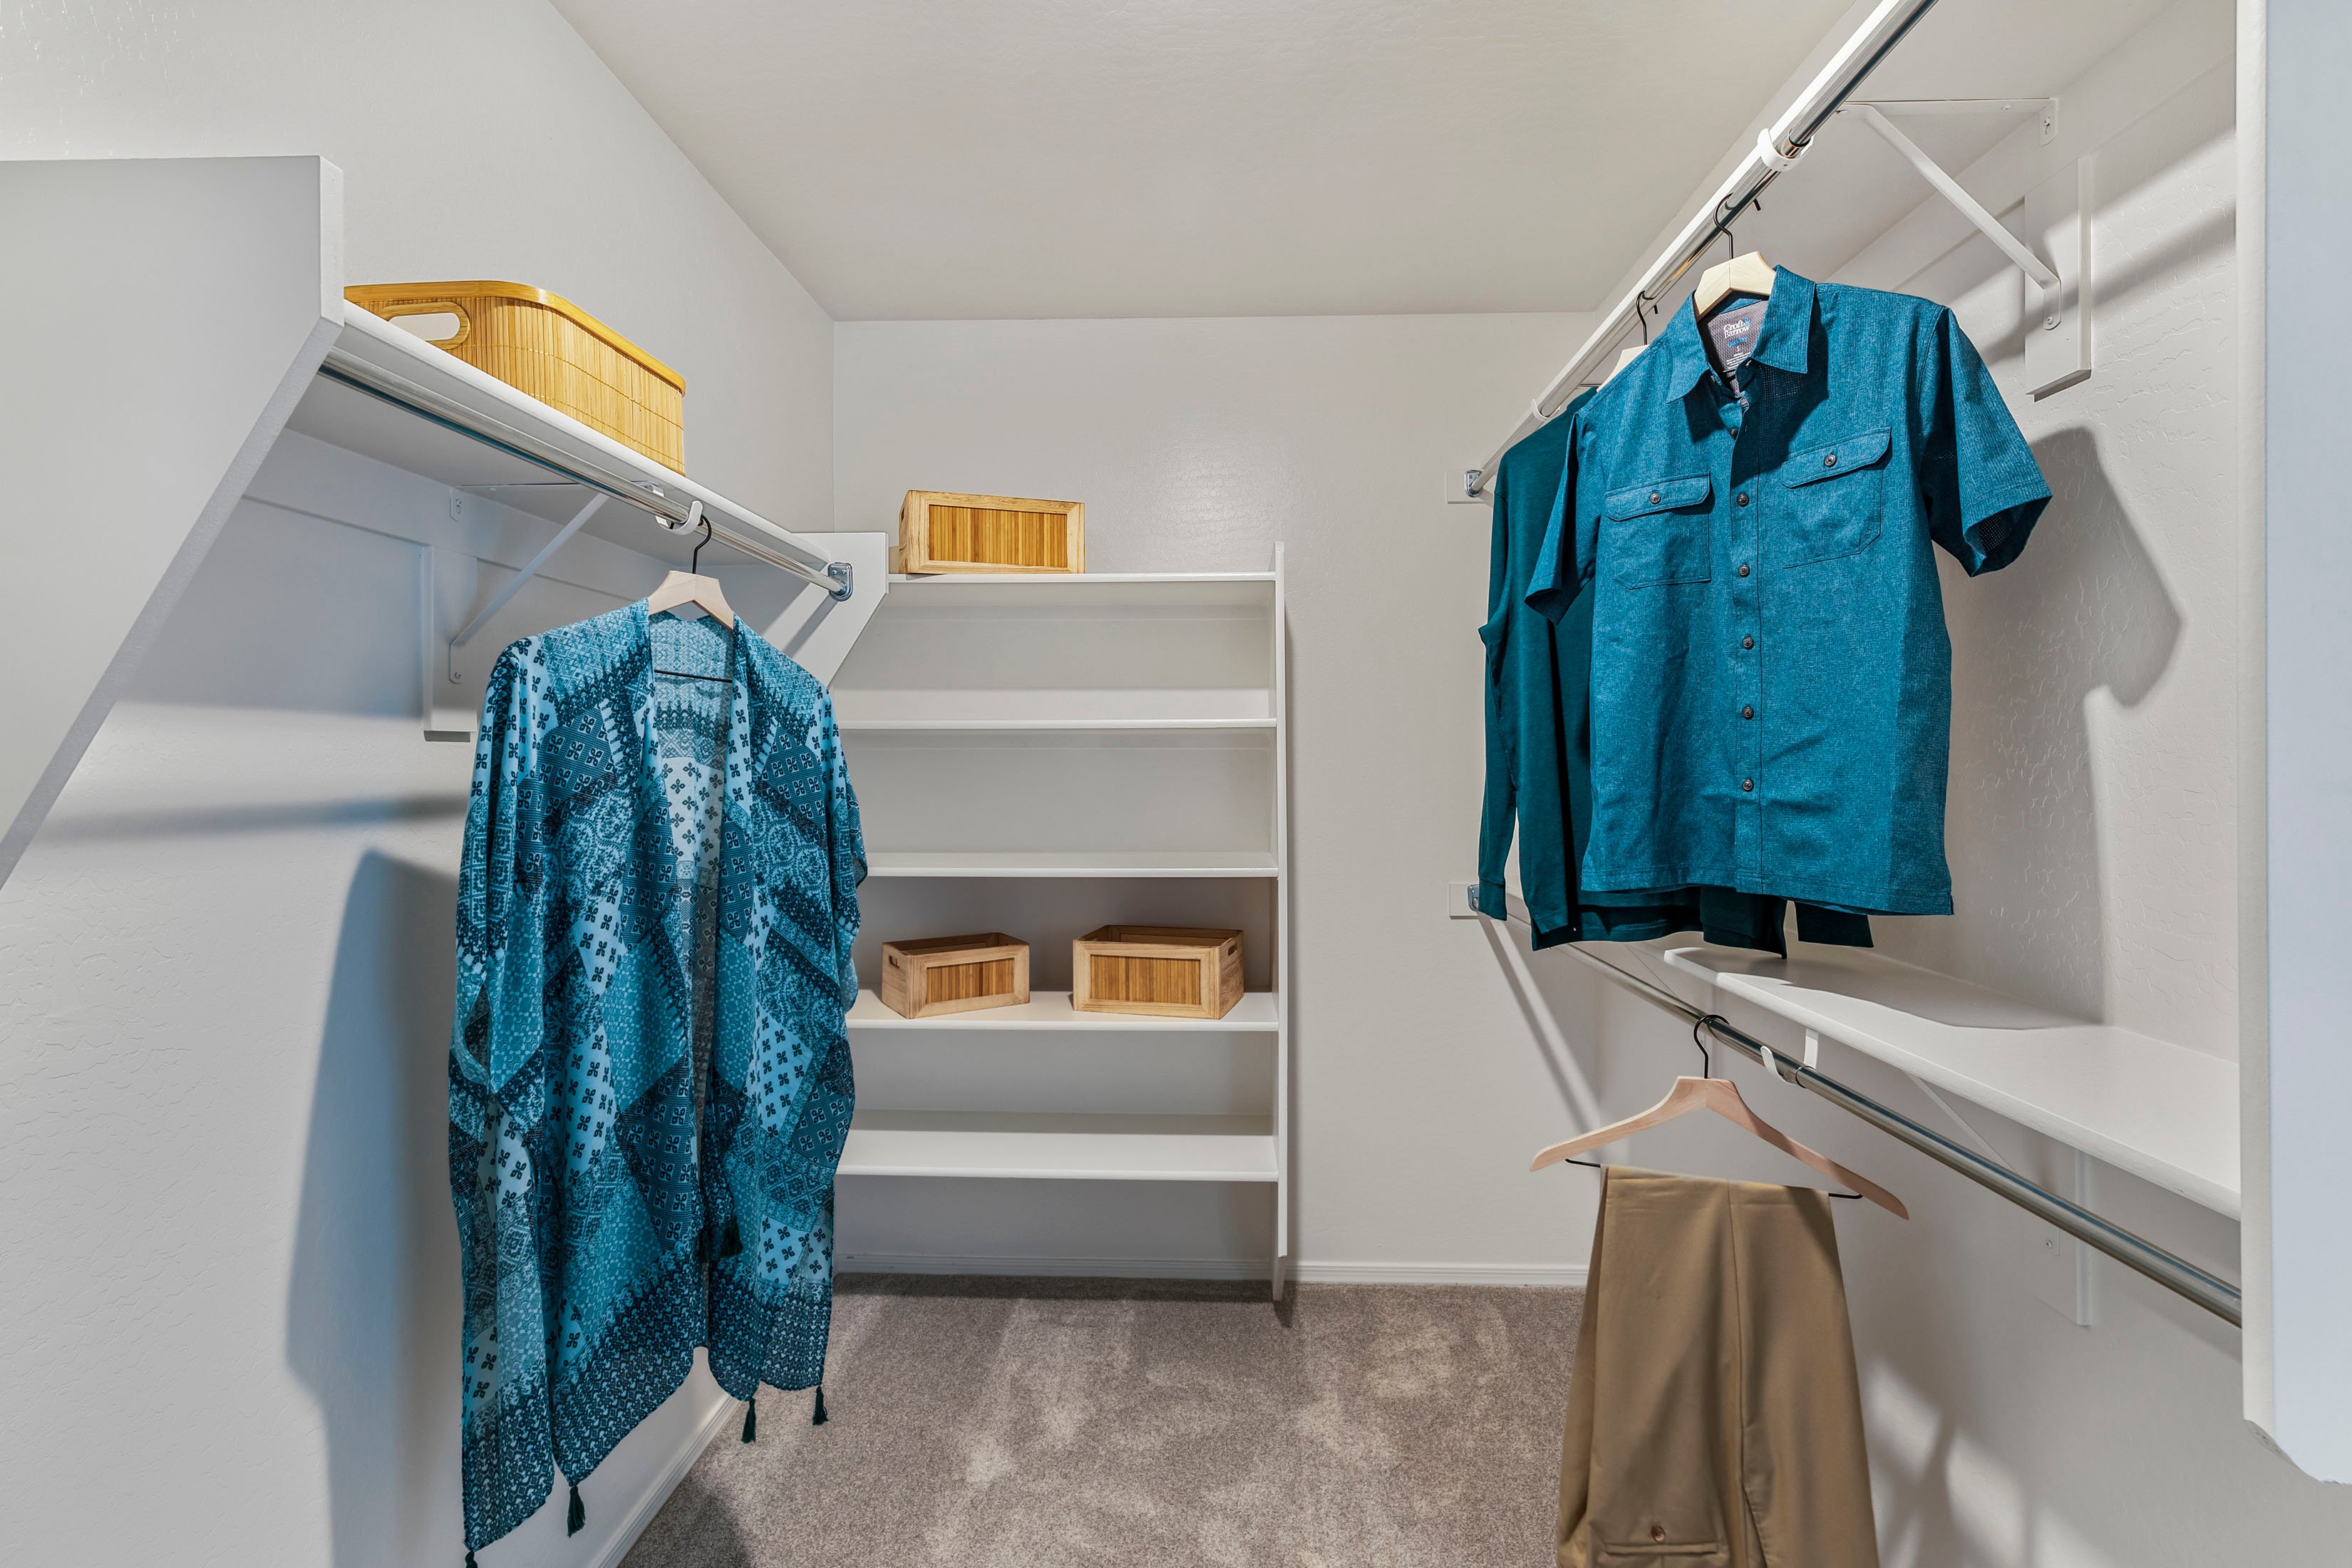 Oversized closet at primary bedroom